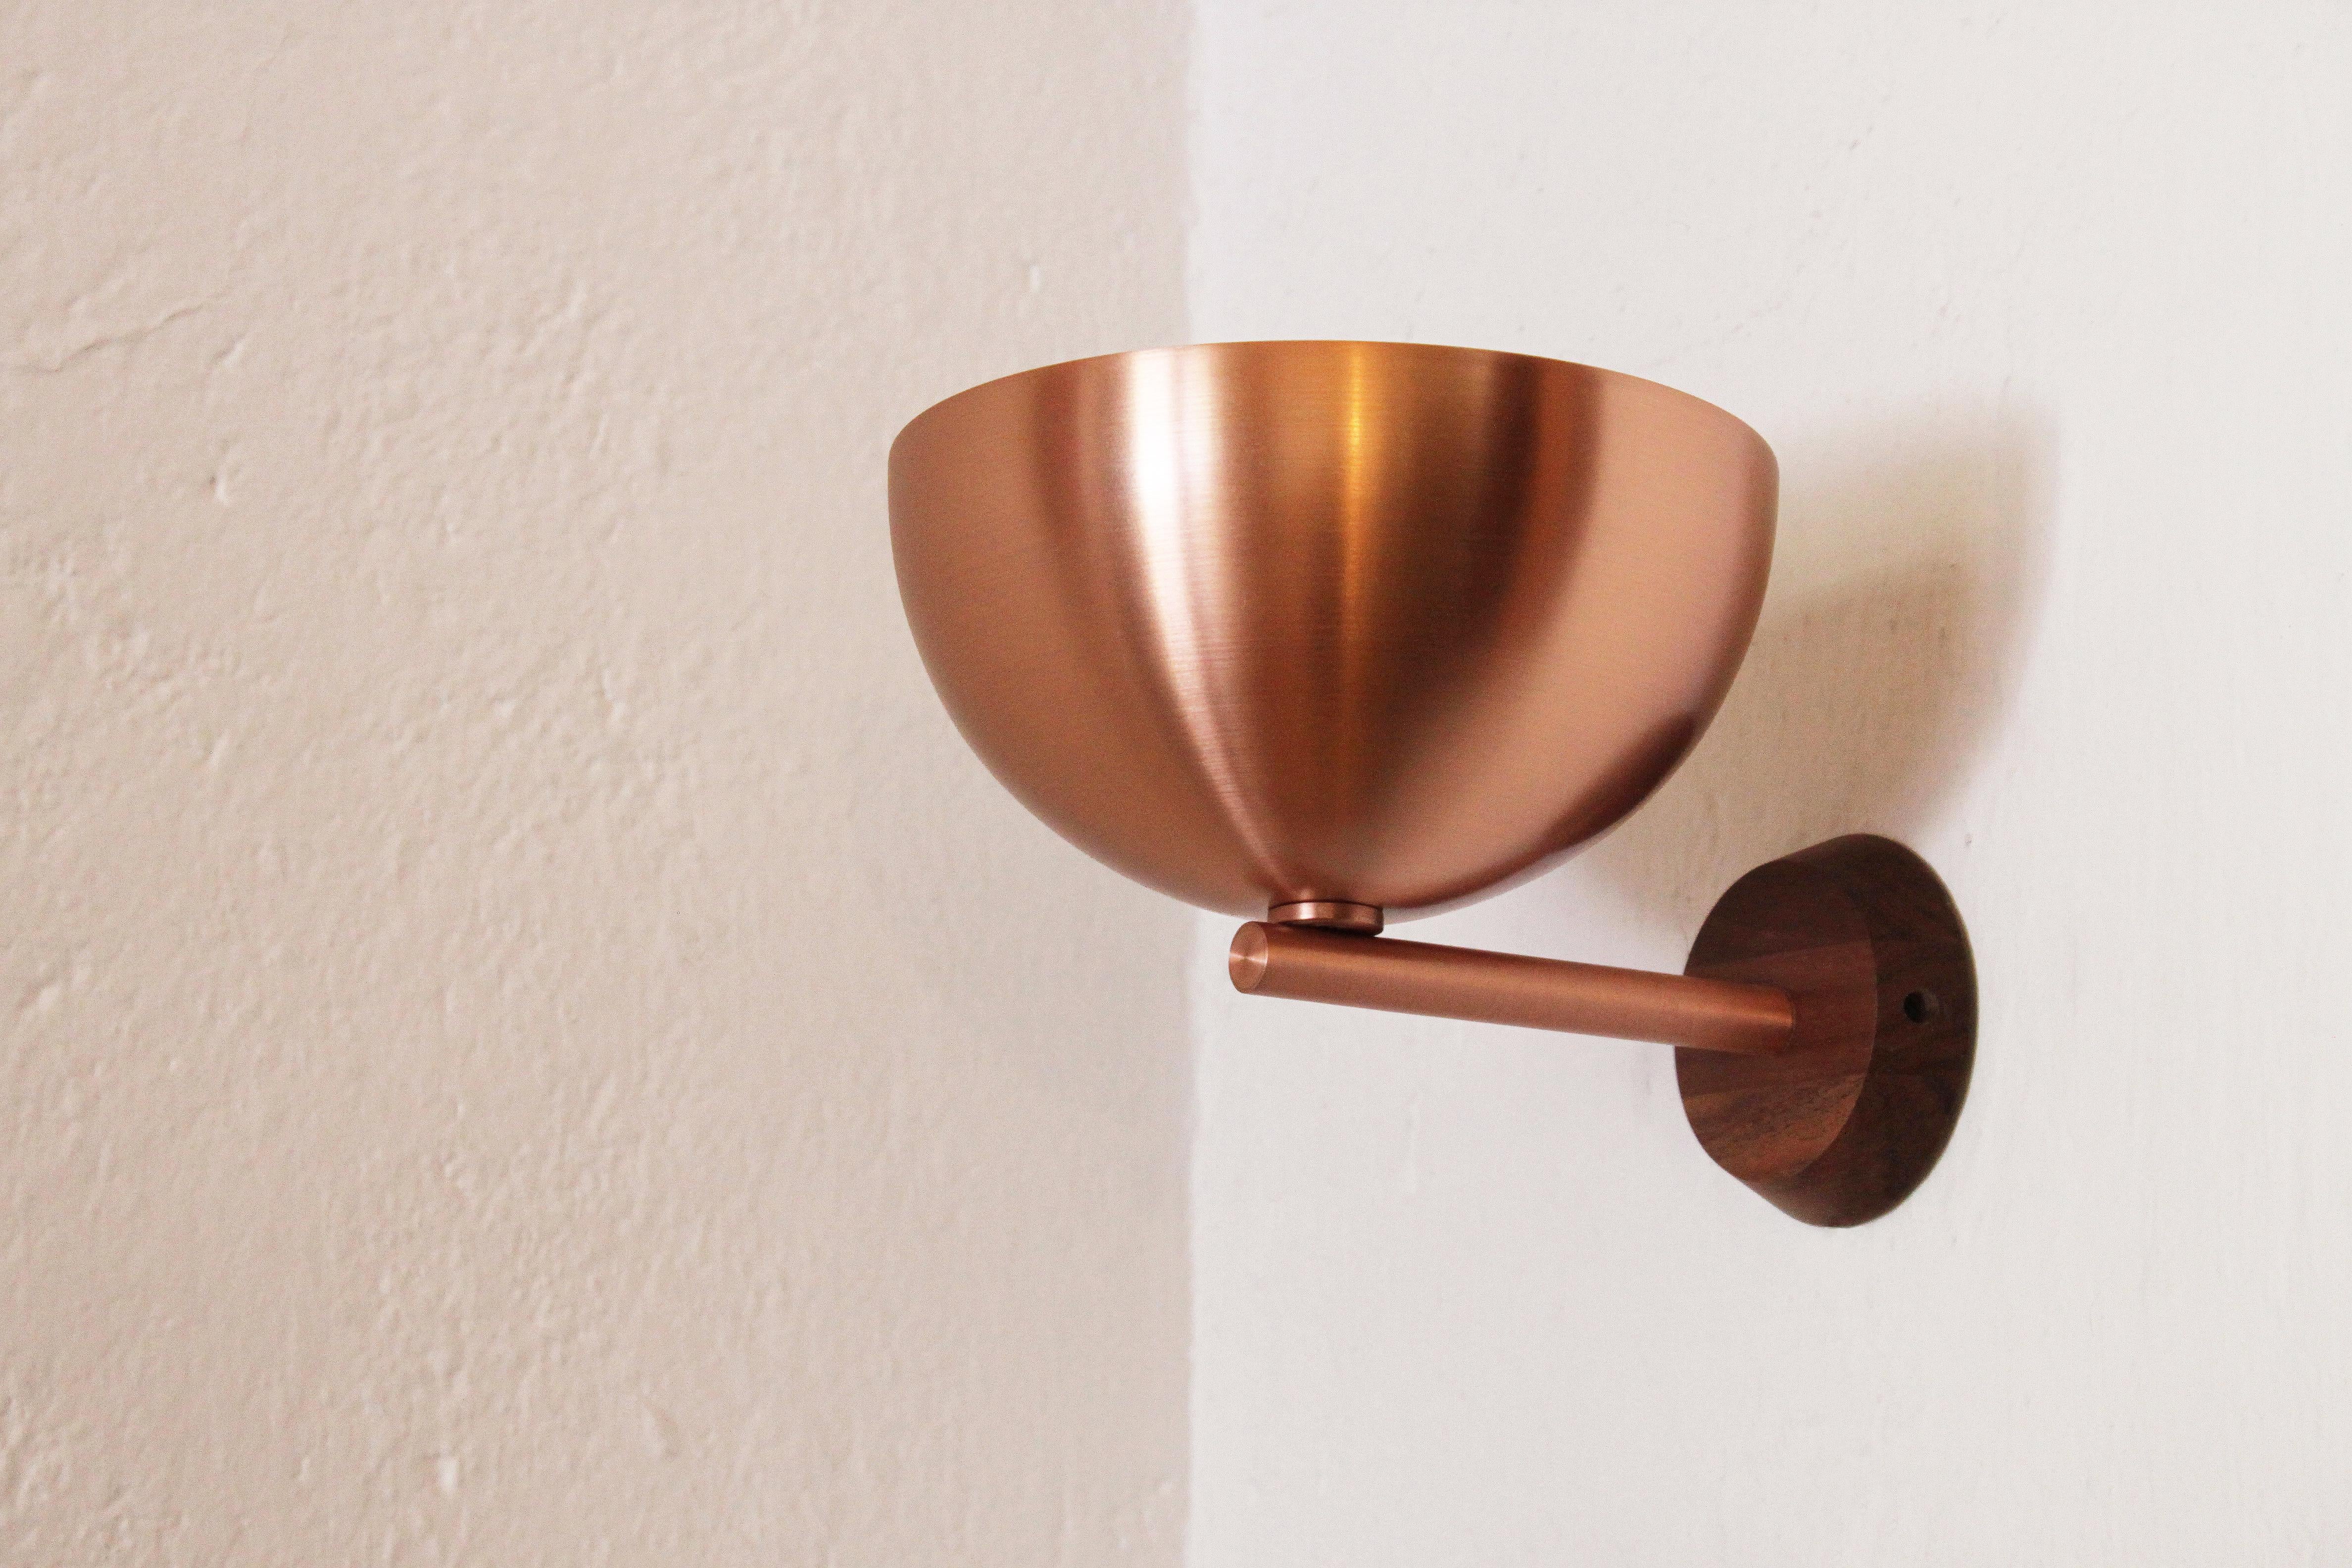 Contemporary Clasica A Muro Wall Sconce by Maria Beckmann, Represented by Tuleste Factory